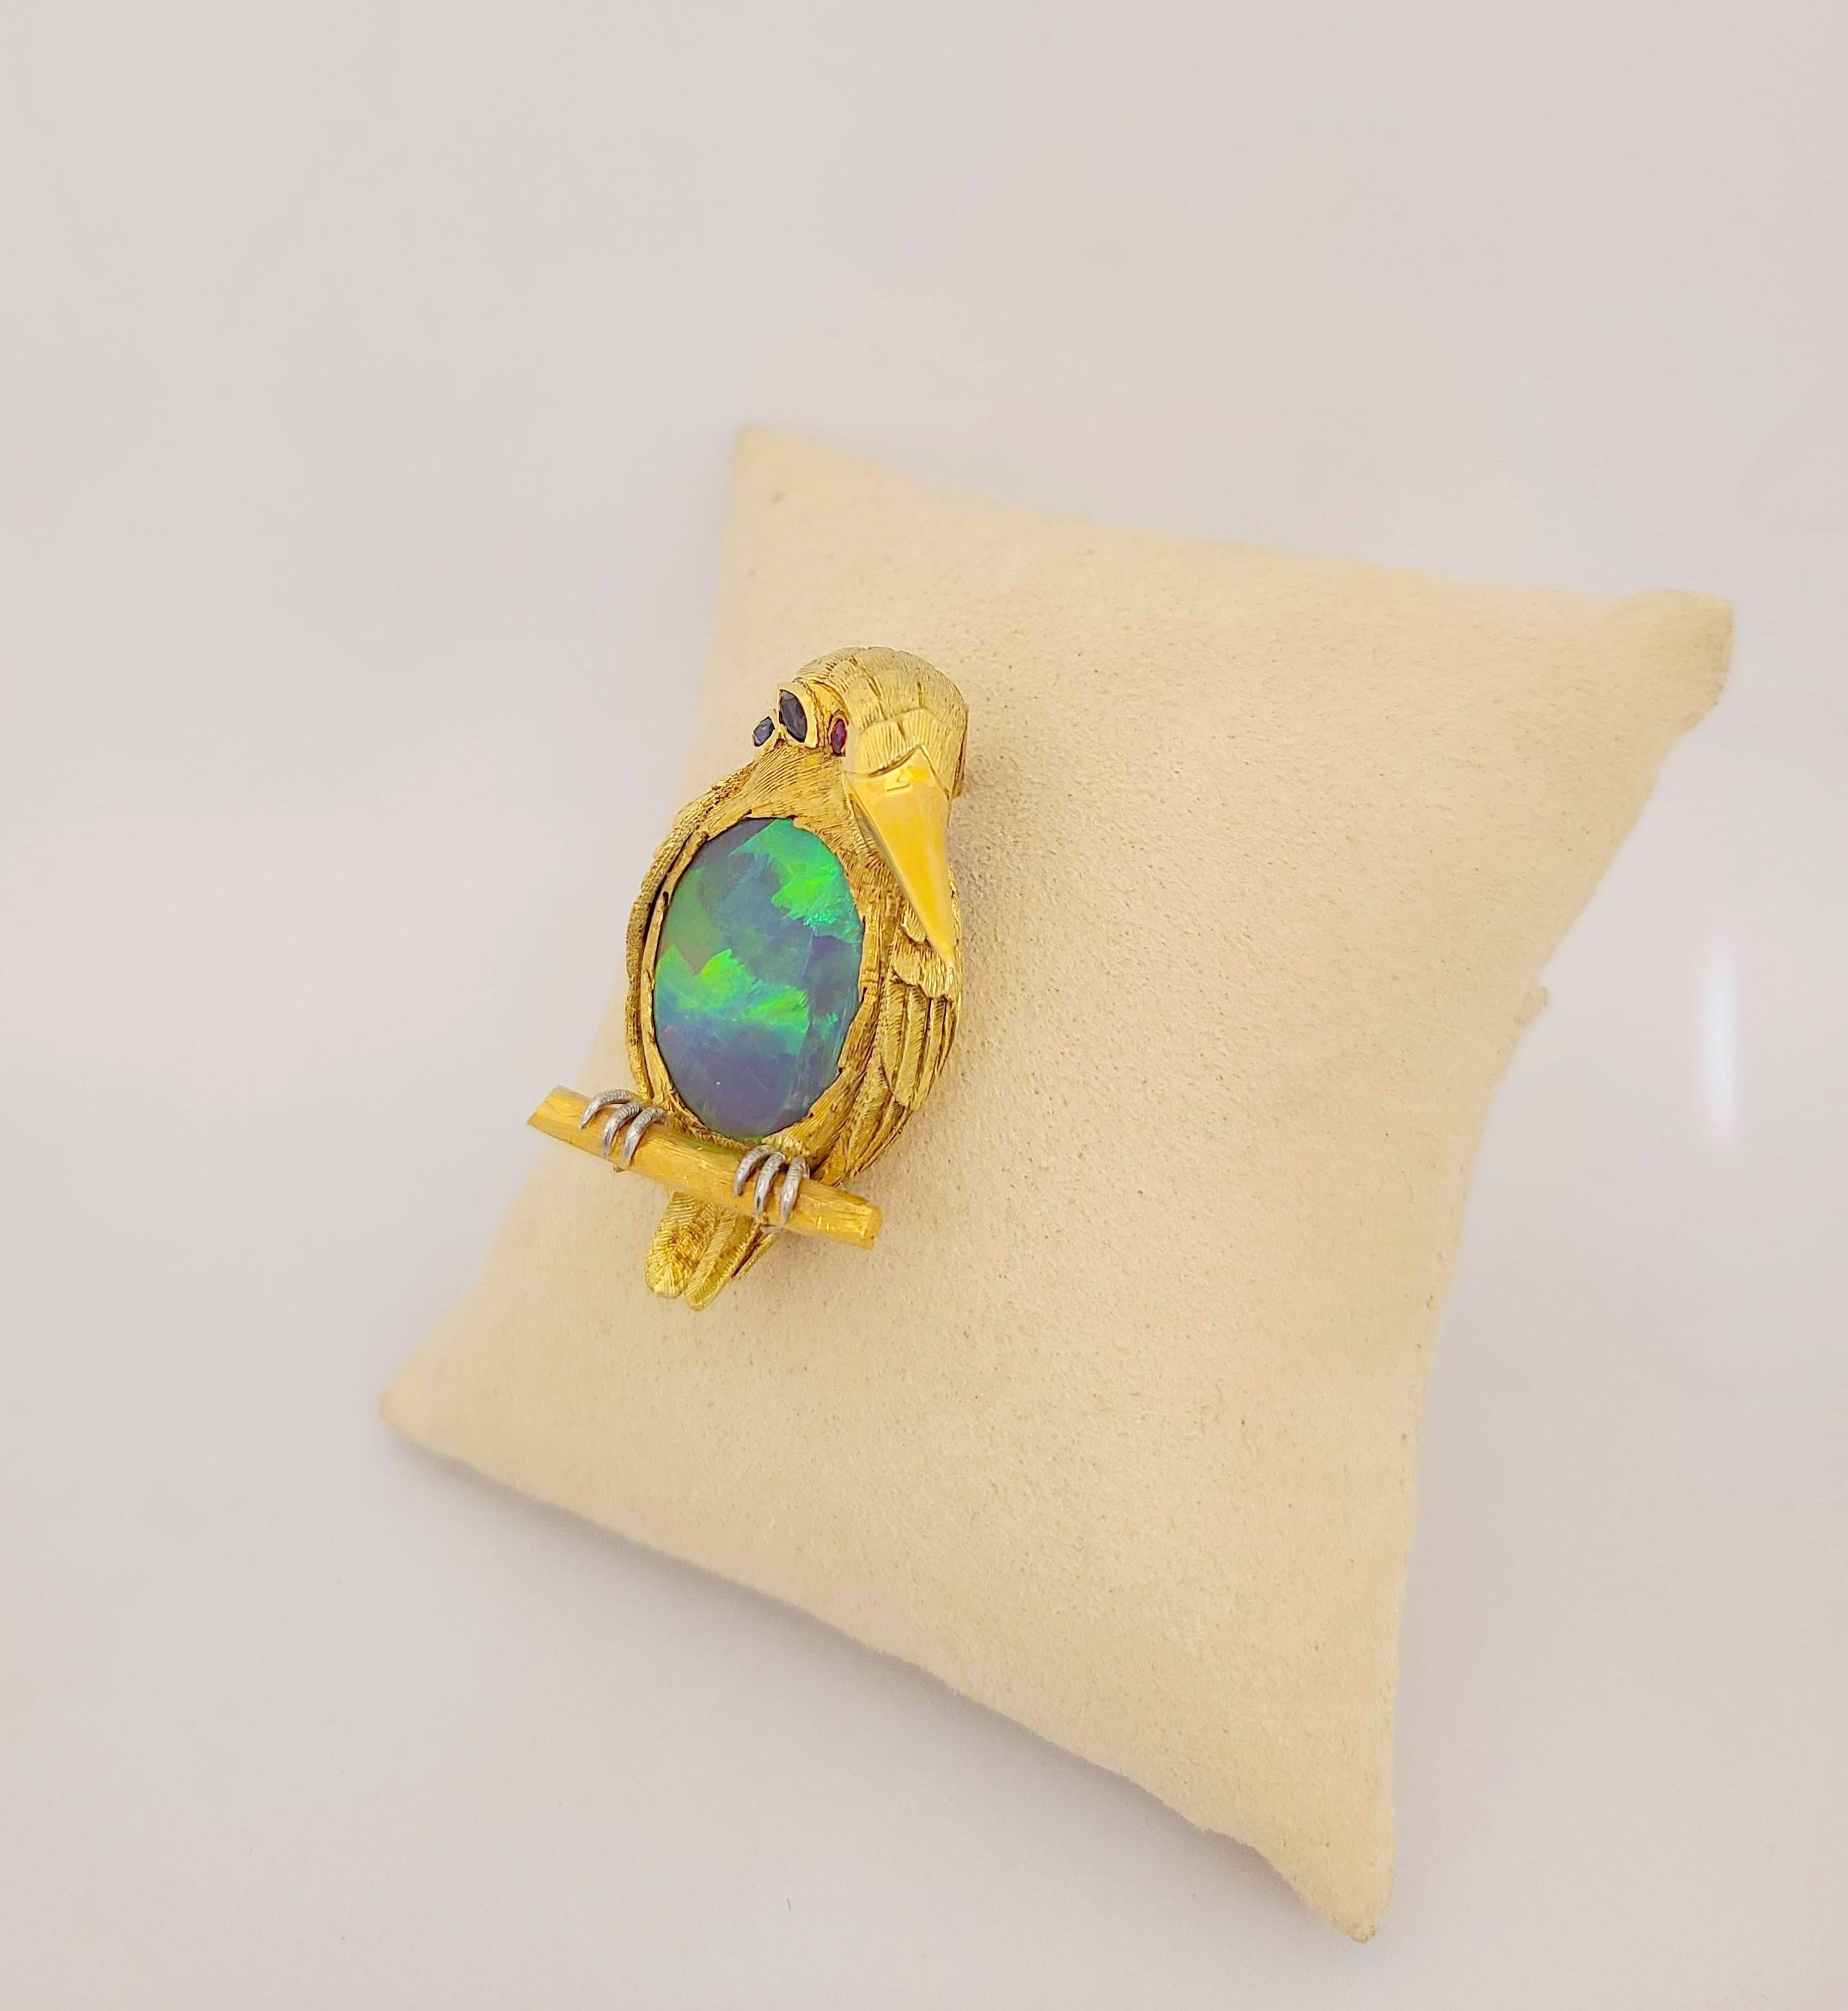 Designed as a King Puffin brooch. The artfully carved body is in 18 karat yellow gold with a sandblasted finish. The amazing feature is the birds belly which has been set with a large oval black opal . The opal has been set with the flat side facing